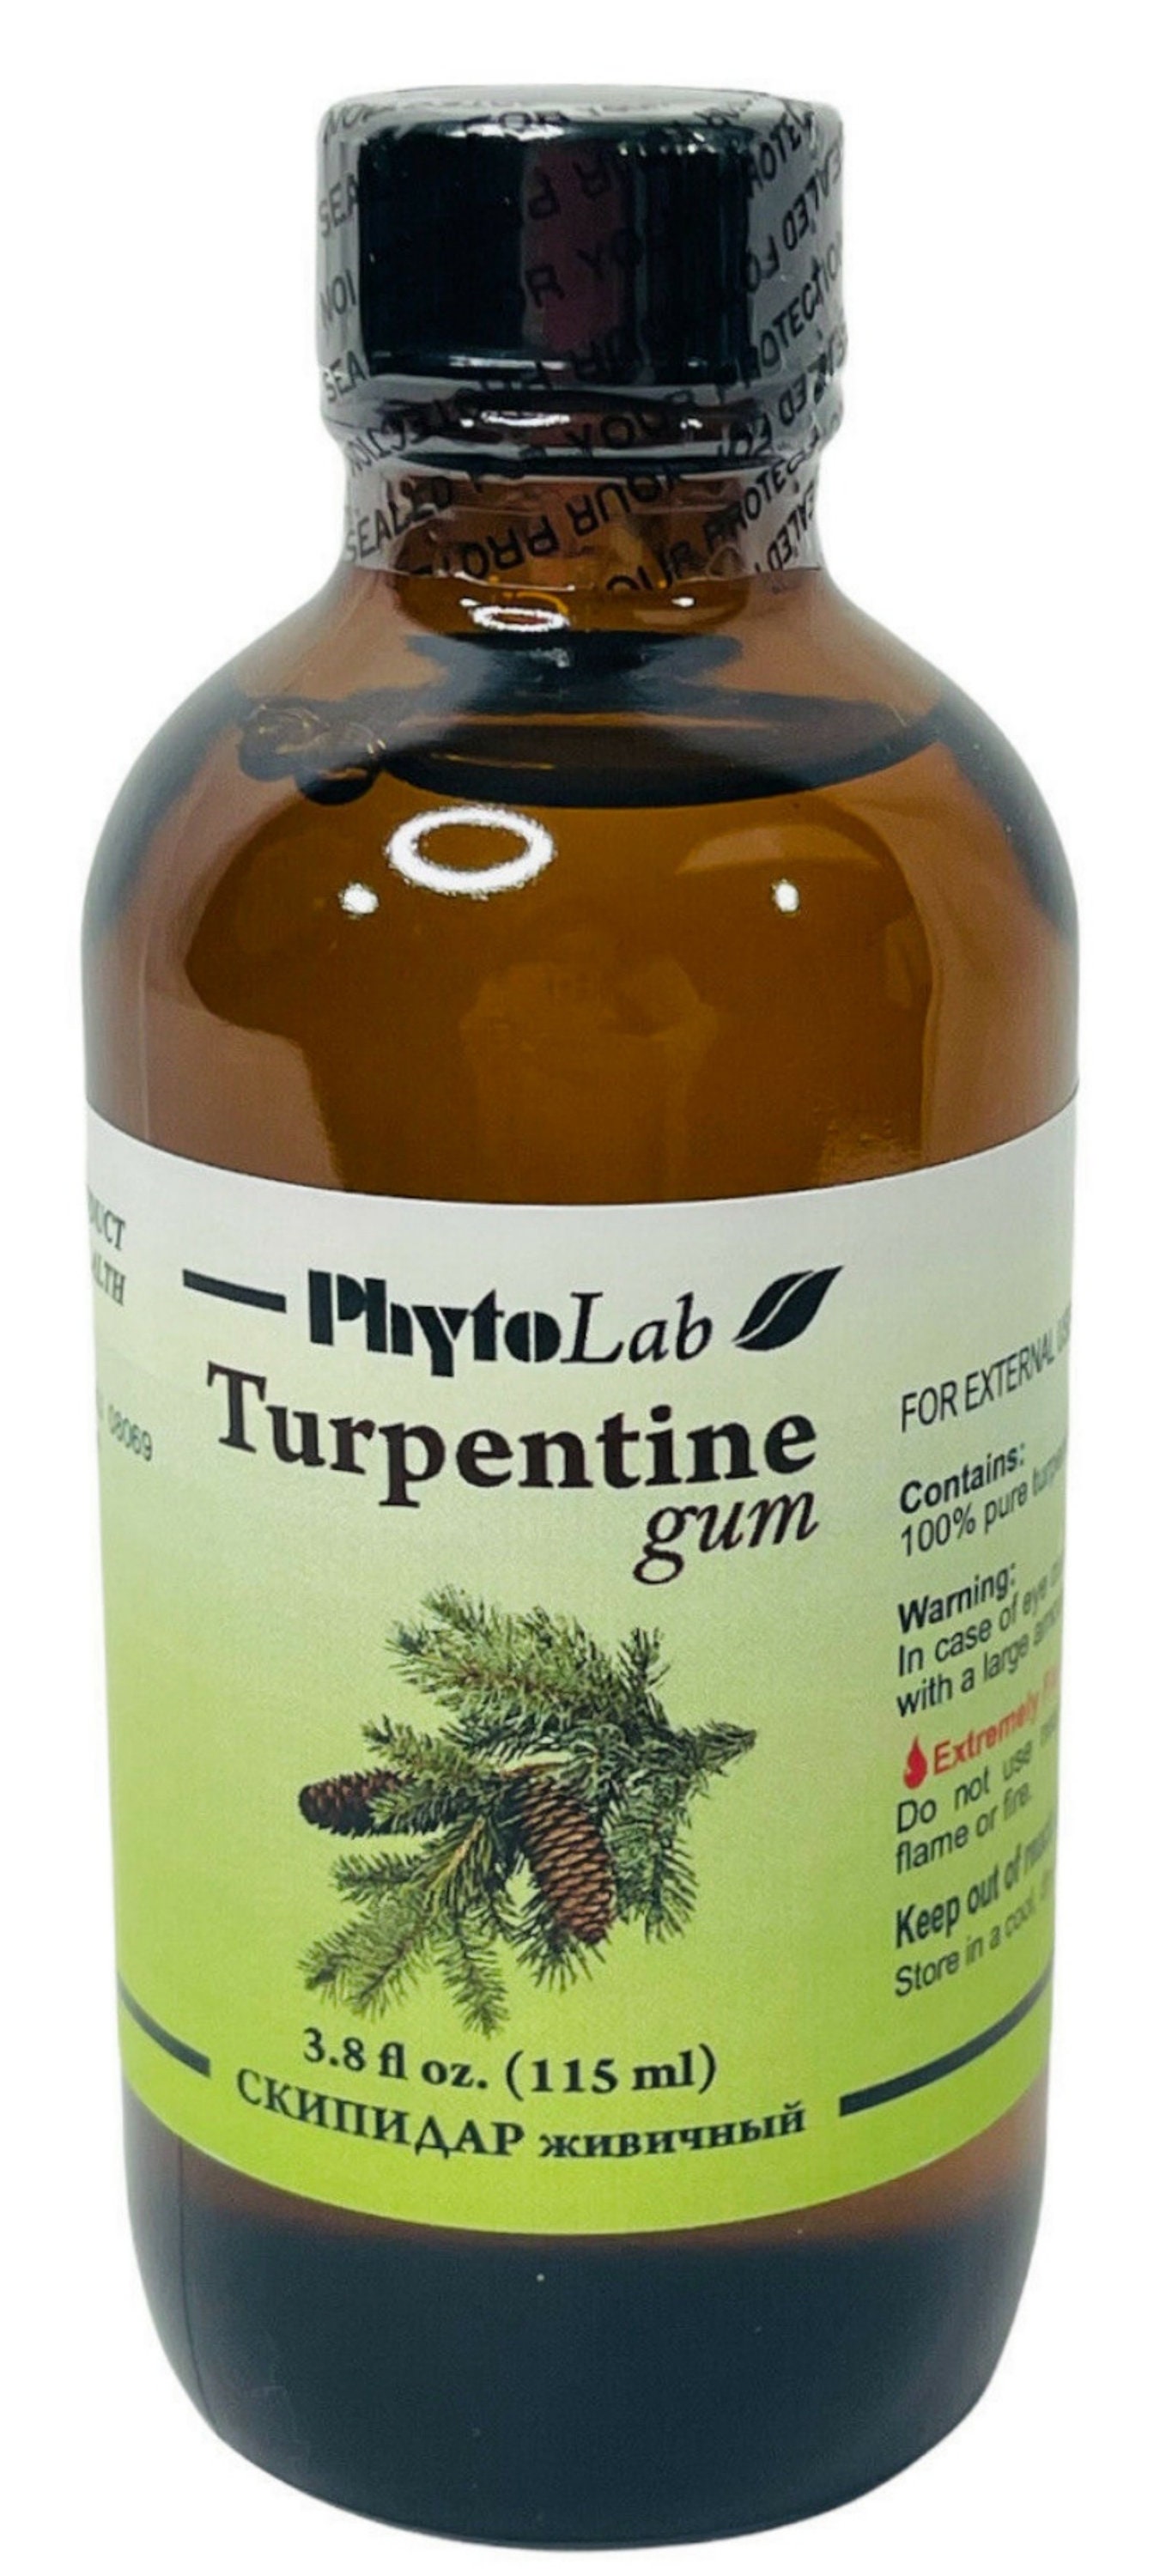 Ayuugain - #turpentine oil is has a great history in the medicinal